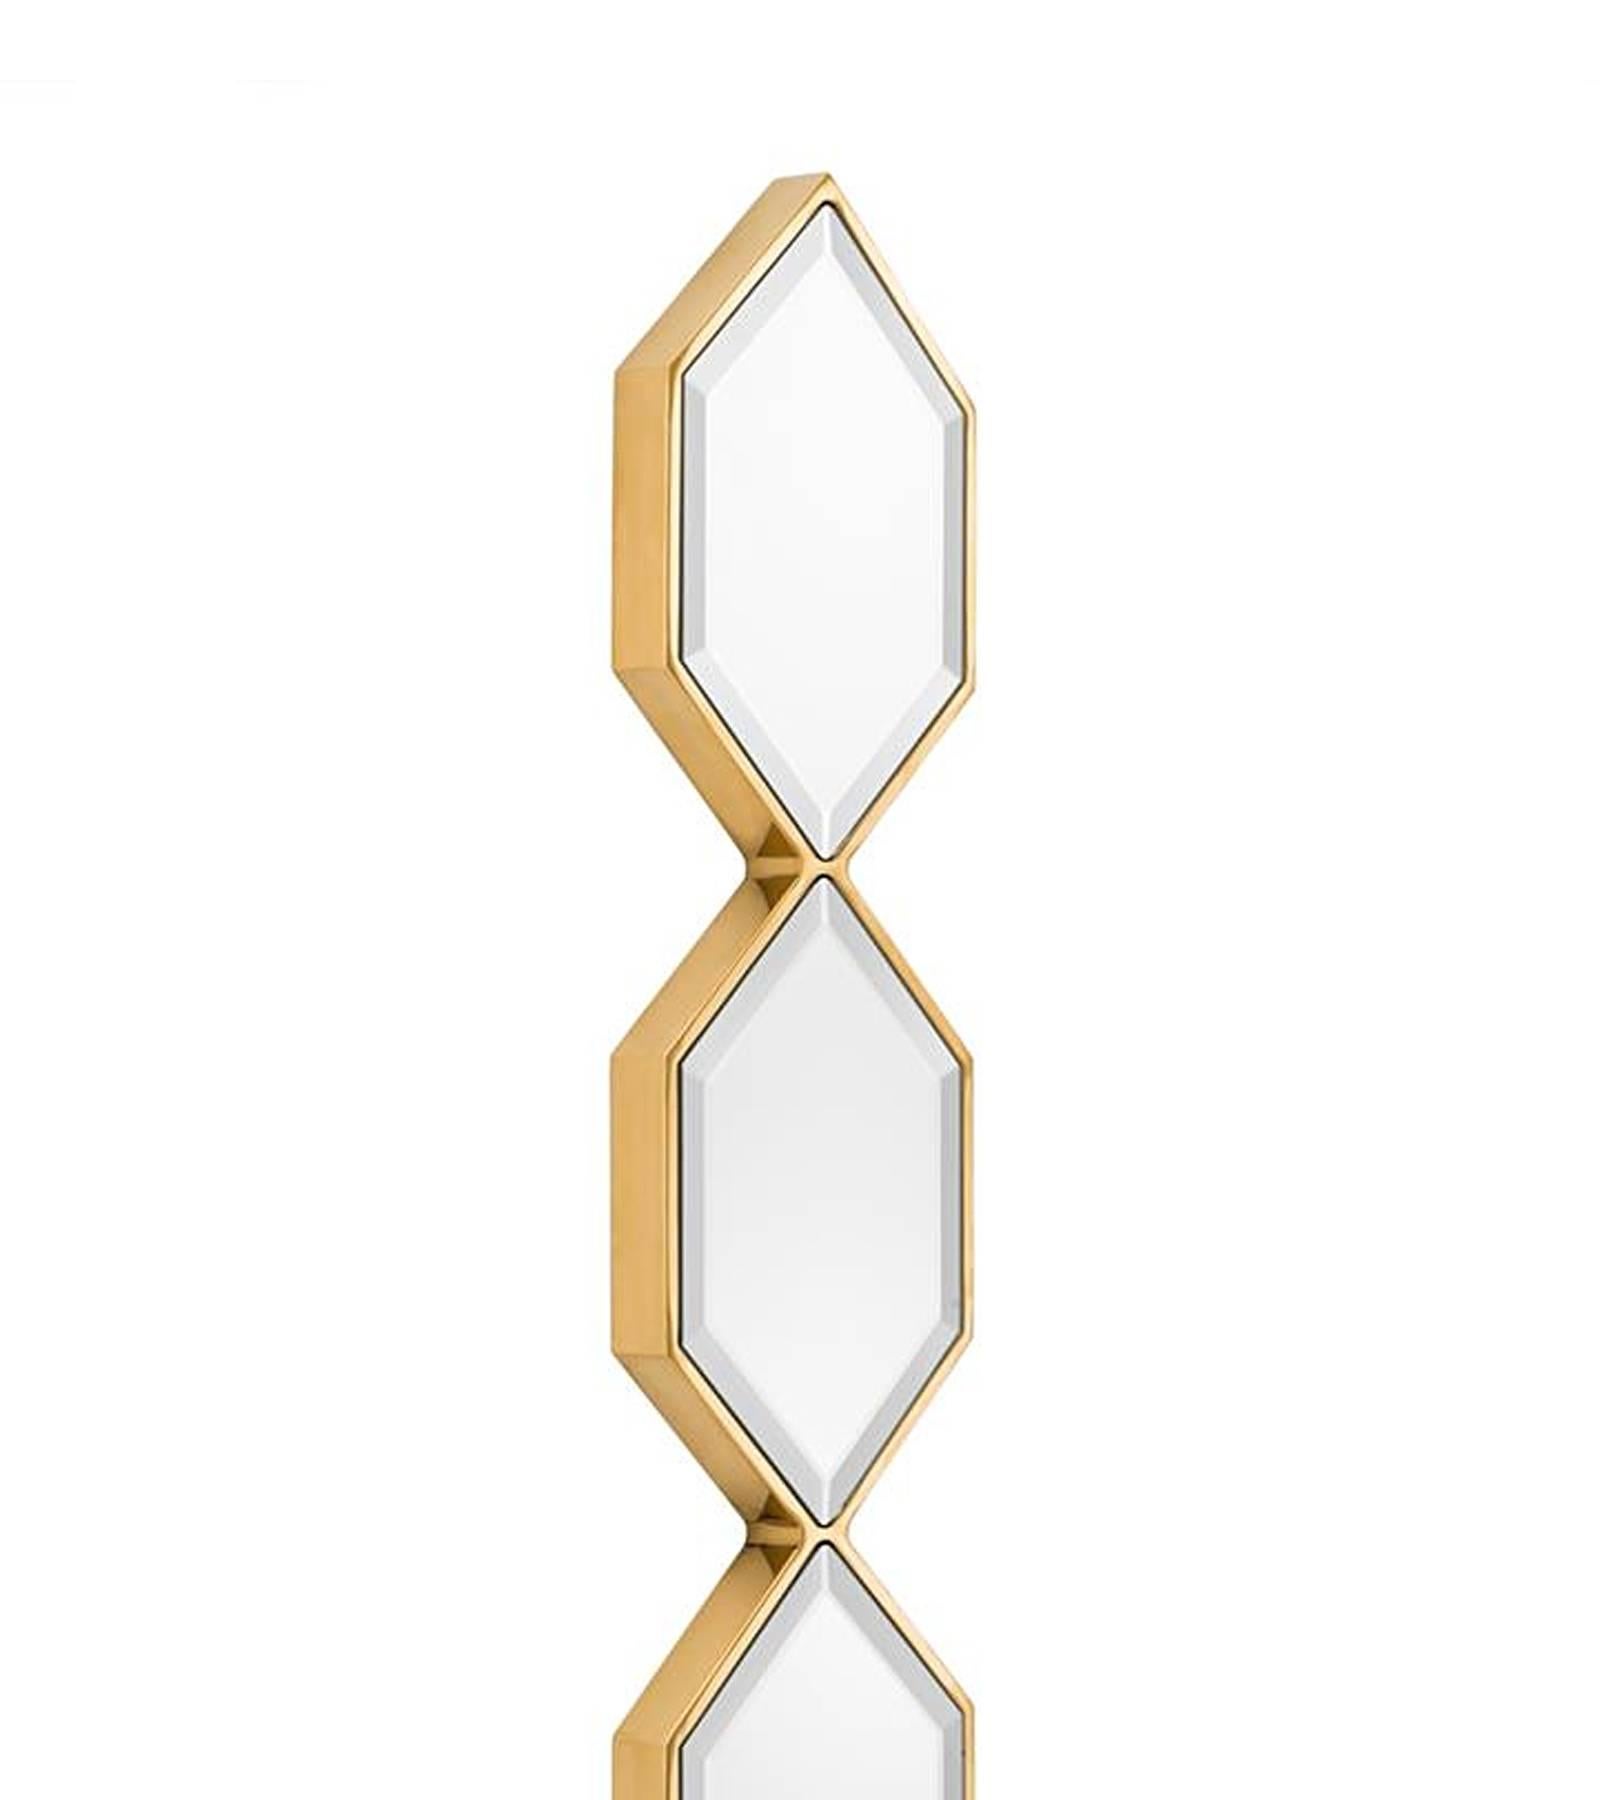 Mirror mandel in polished stainless steel gold finish
composed of three mirrors with bevelled mirror glass.
